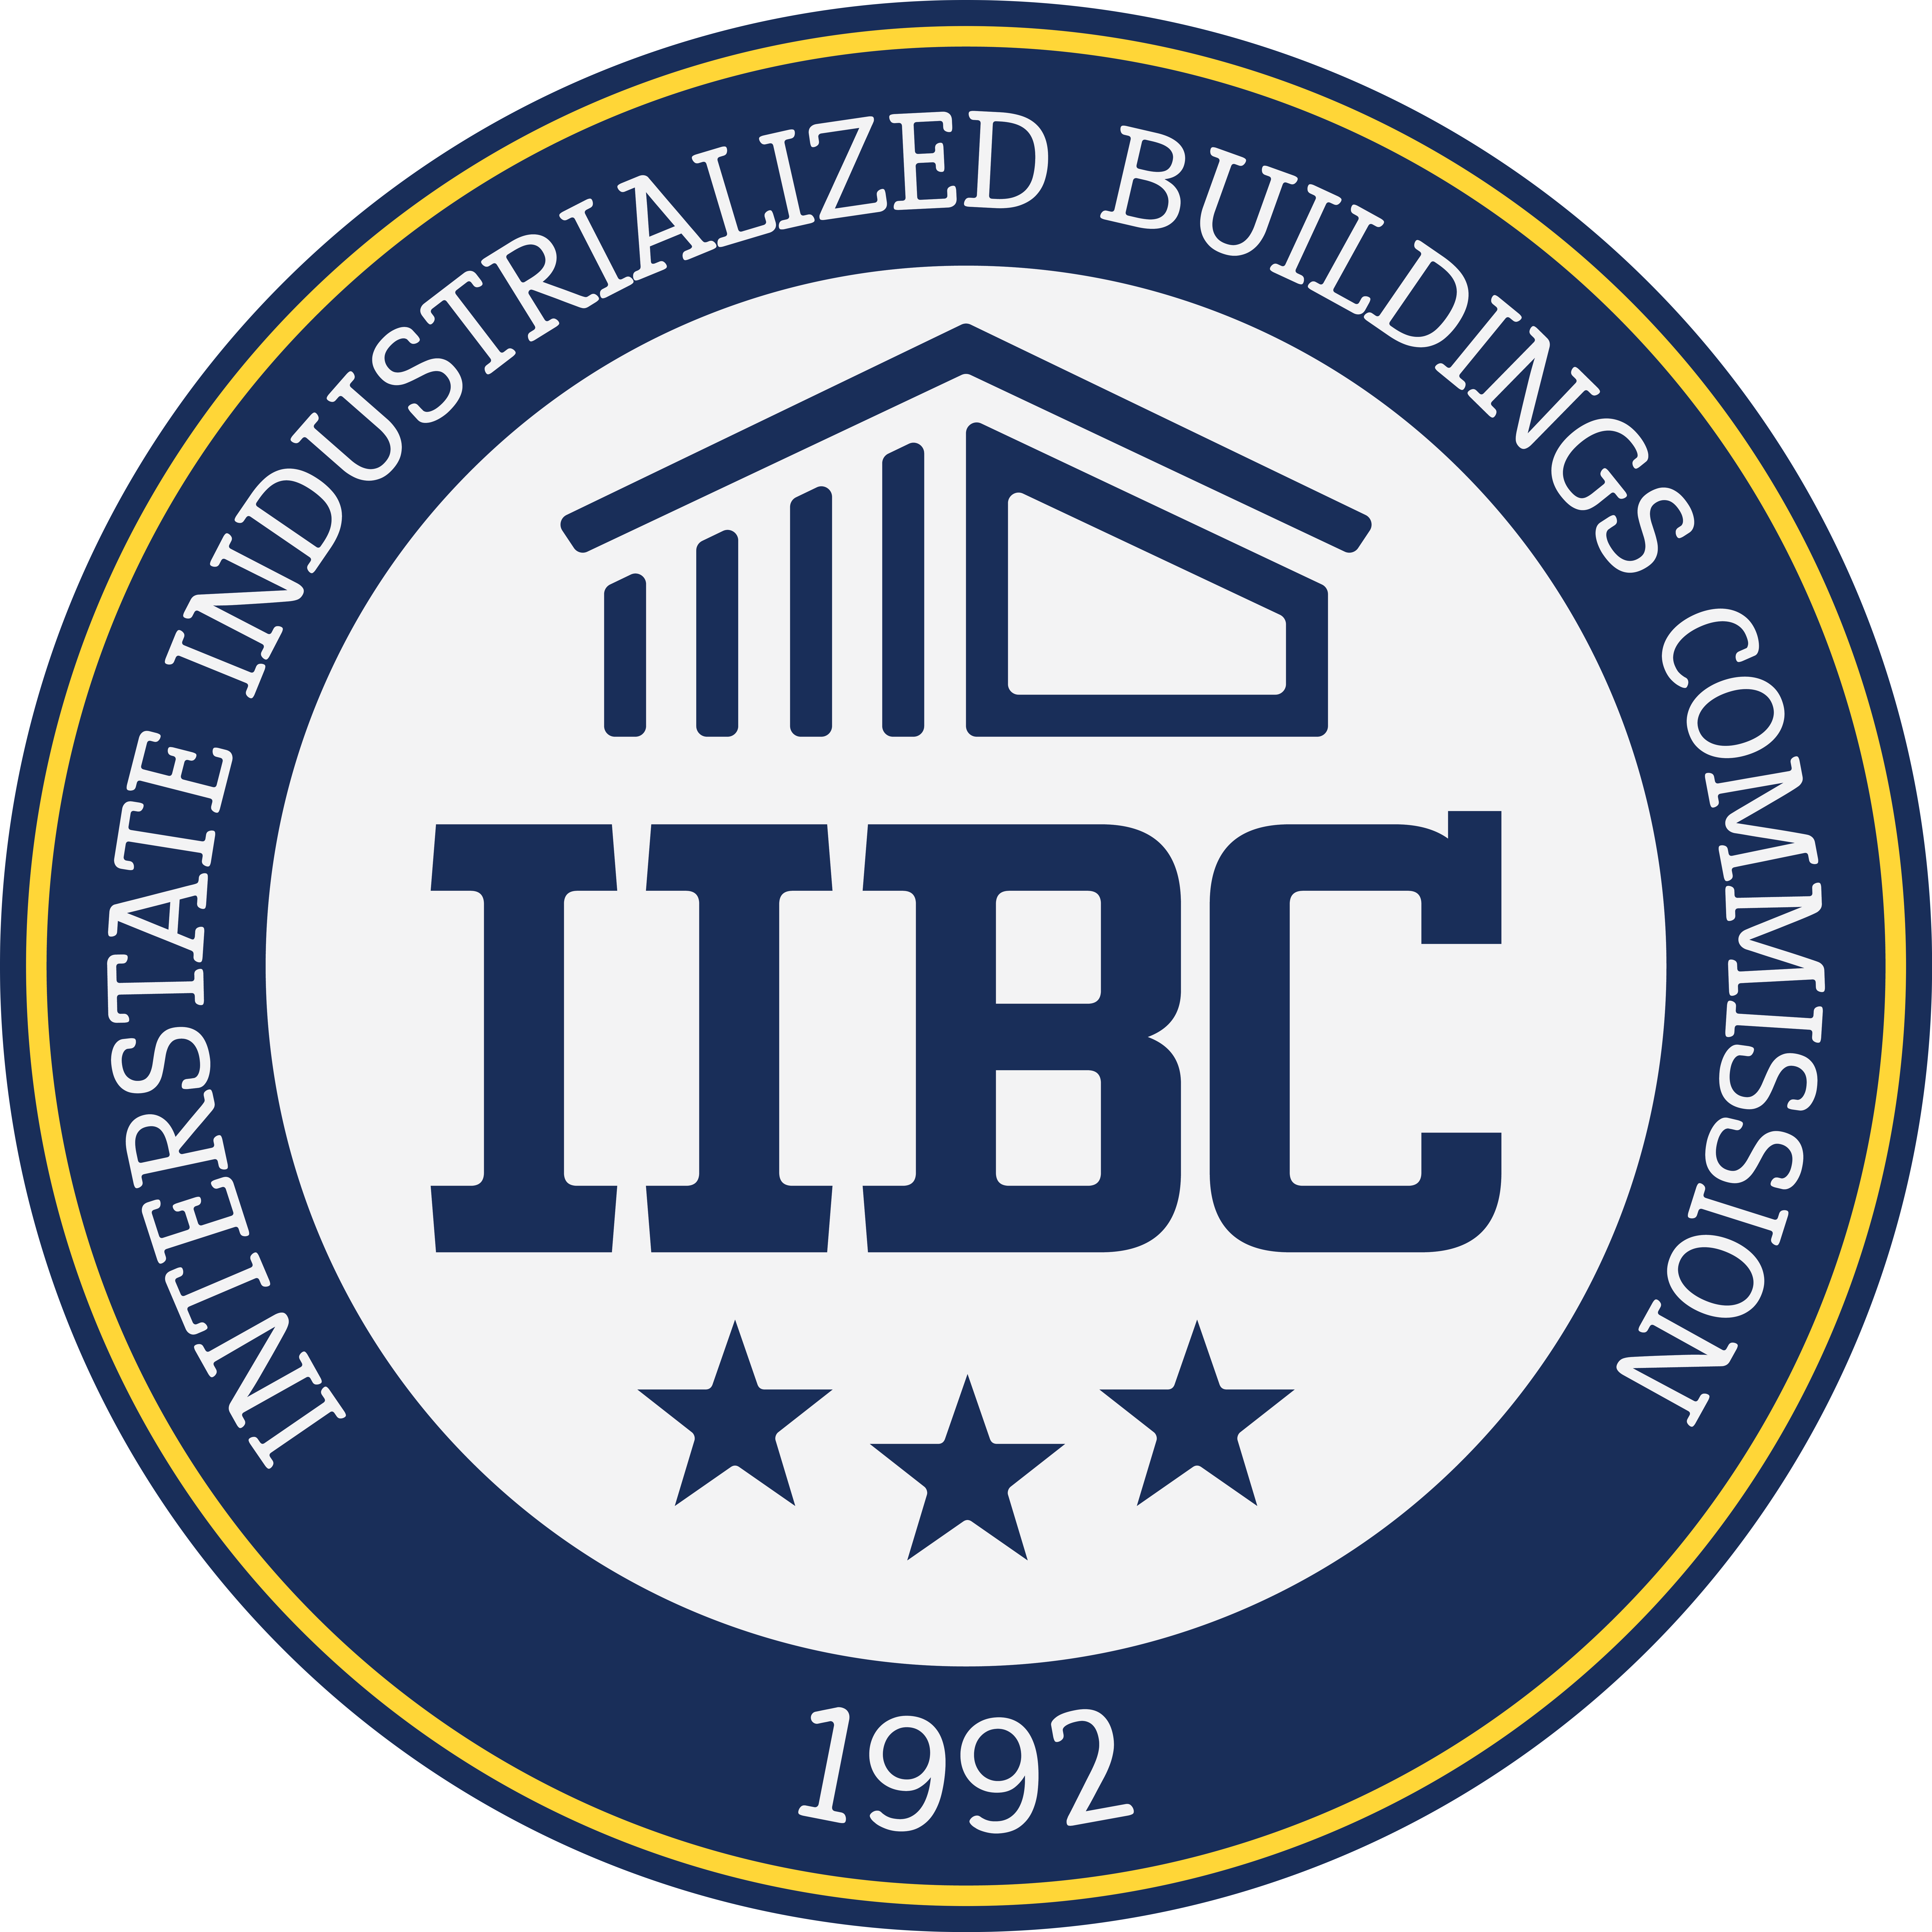 Interstate Industrialized Buildings Commission